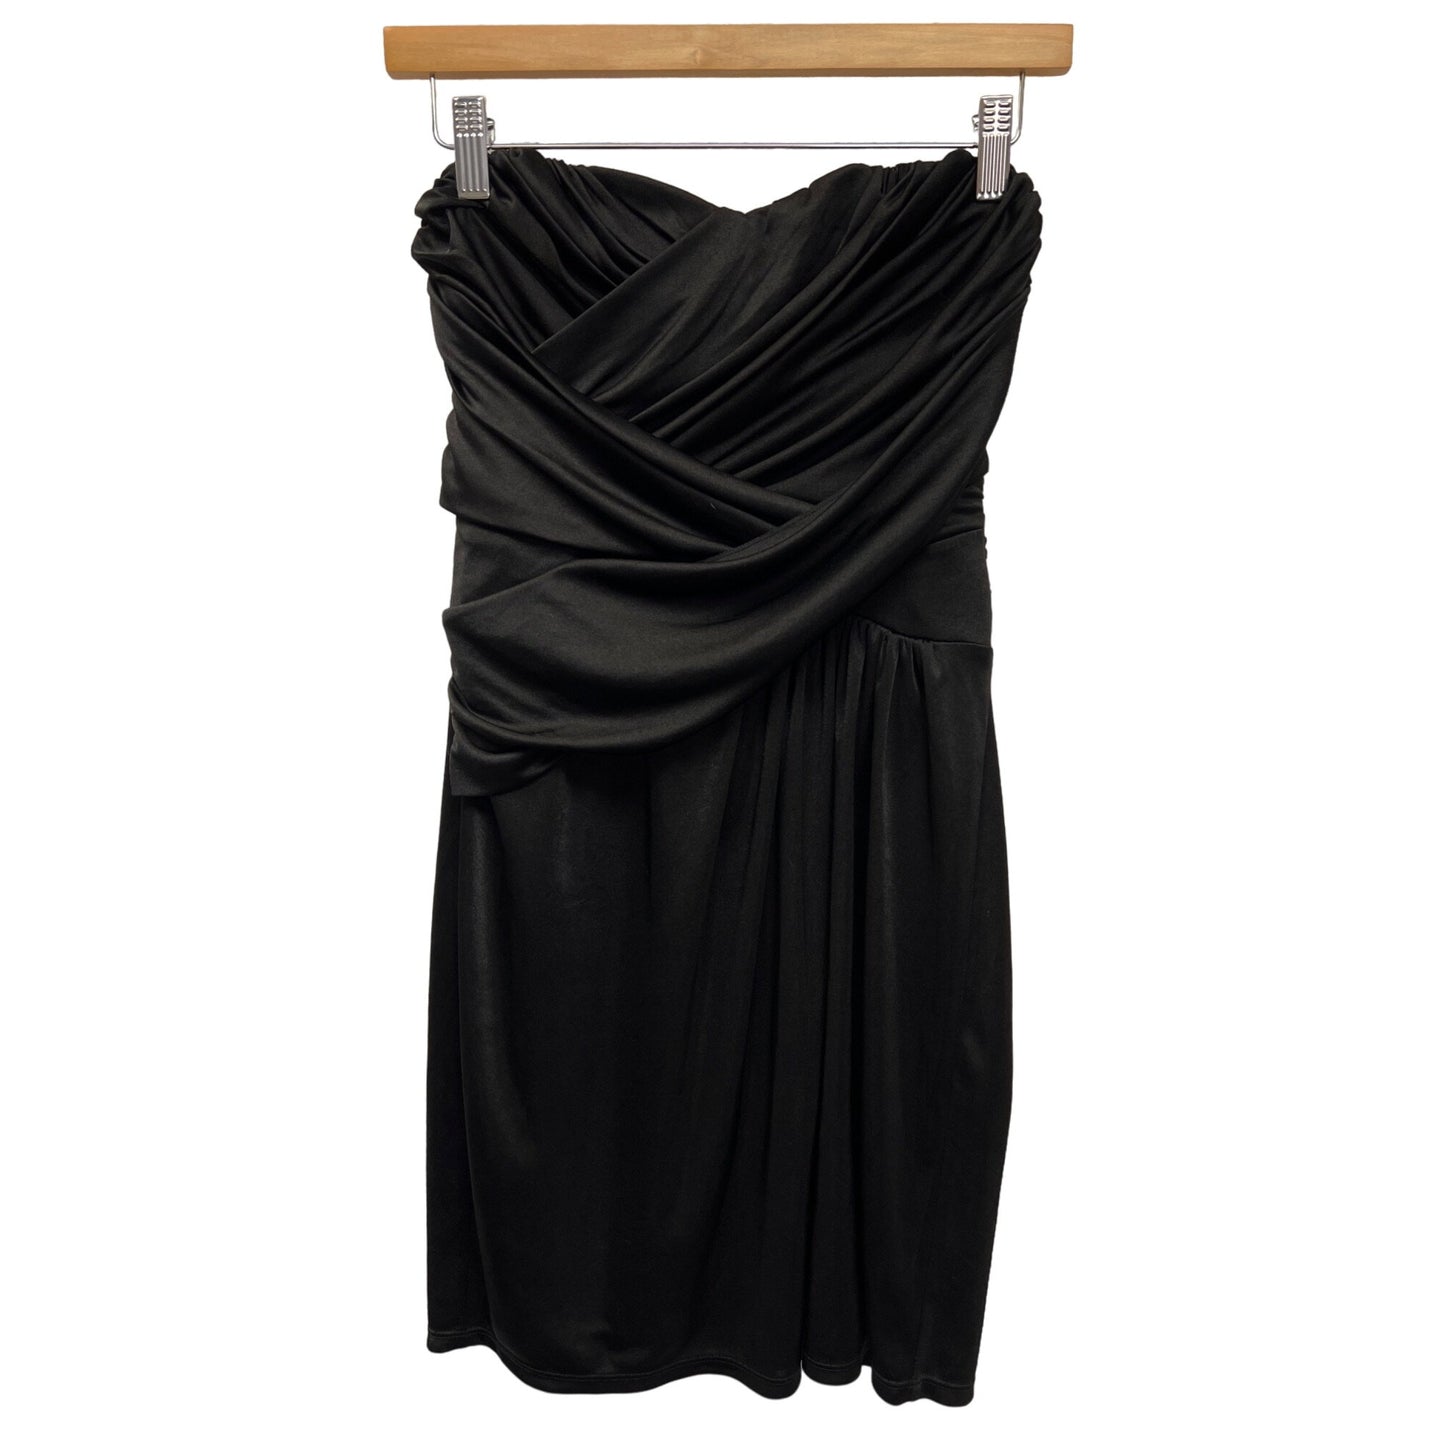 Express Black Strapless Ruched Bodycon Dress